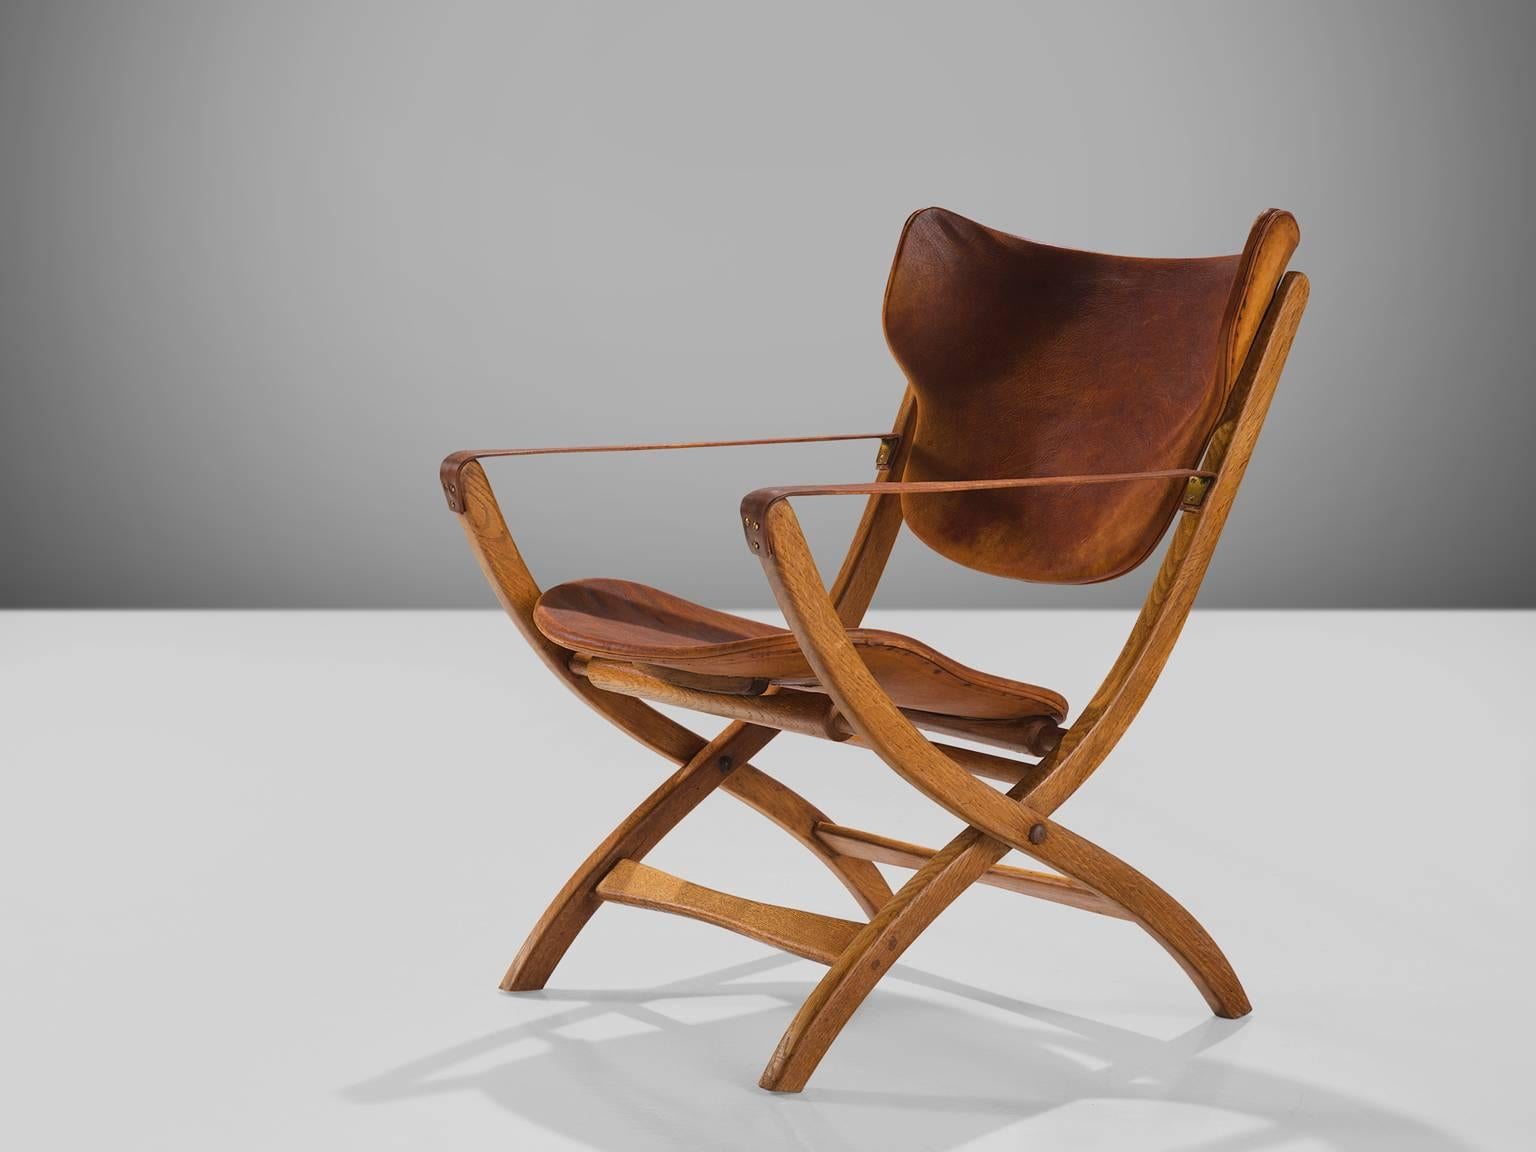 Poul Hundevad, 'Egyptian' chairs, cognac leather, beech and birch, Denmark, 1950s. 

This side chair is part of the midcentury design collection. This folding chair has X- shaped legs that are inspired on ancient Egyptian thrones and chairs. The